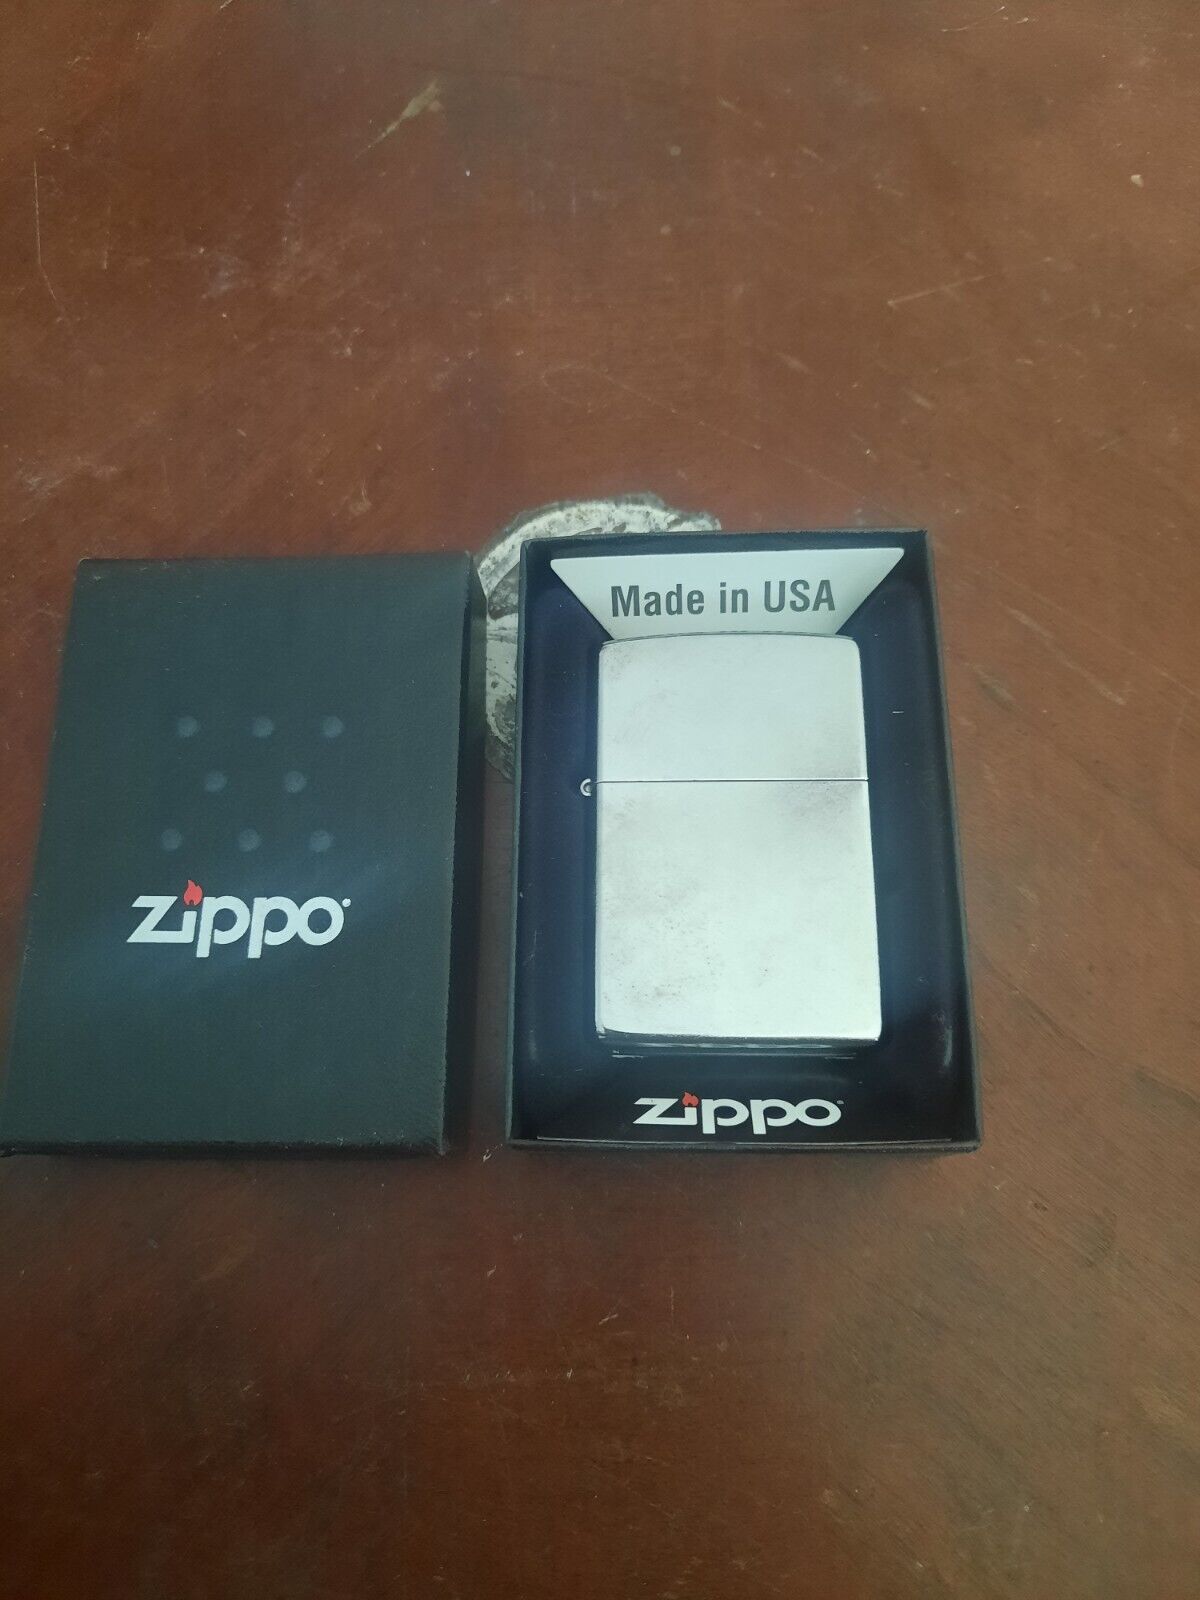 New Zippo Lighter In  Black Zippo Box With New Factory Seal Still On The Lighter